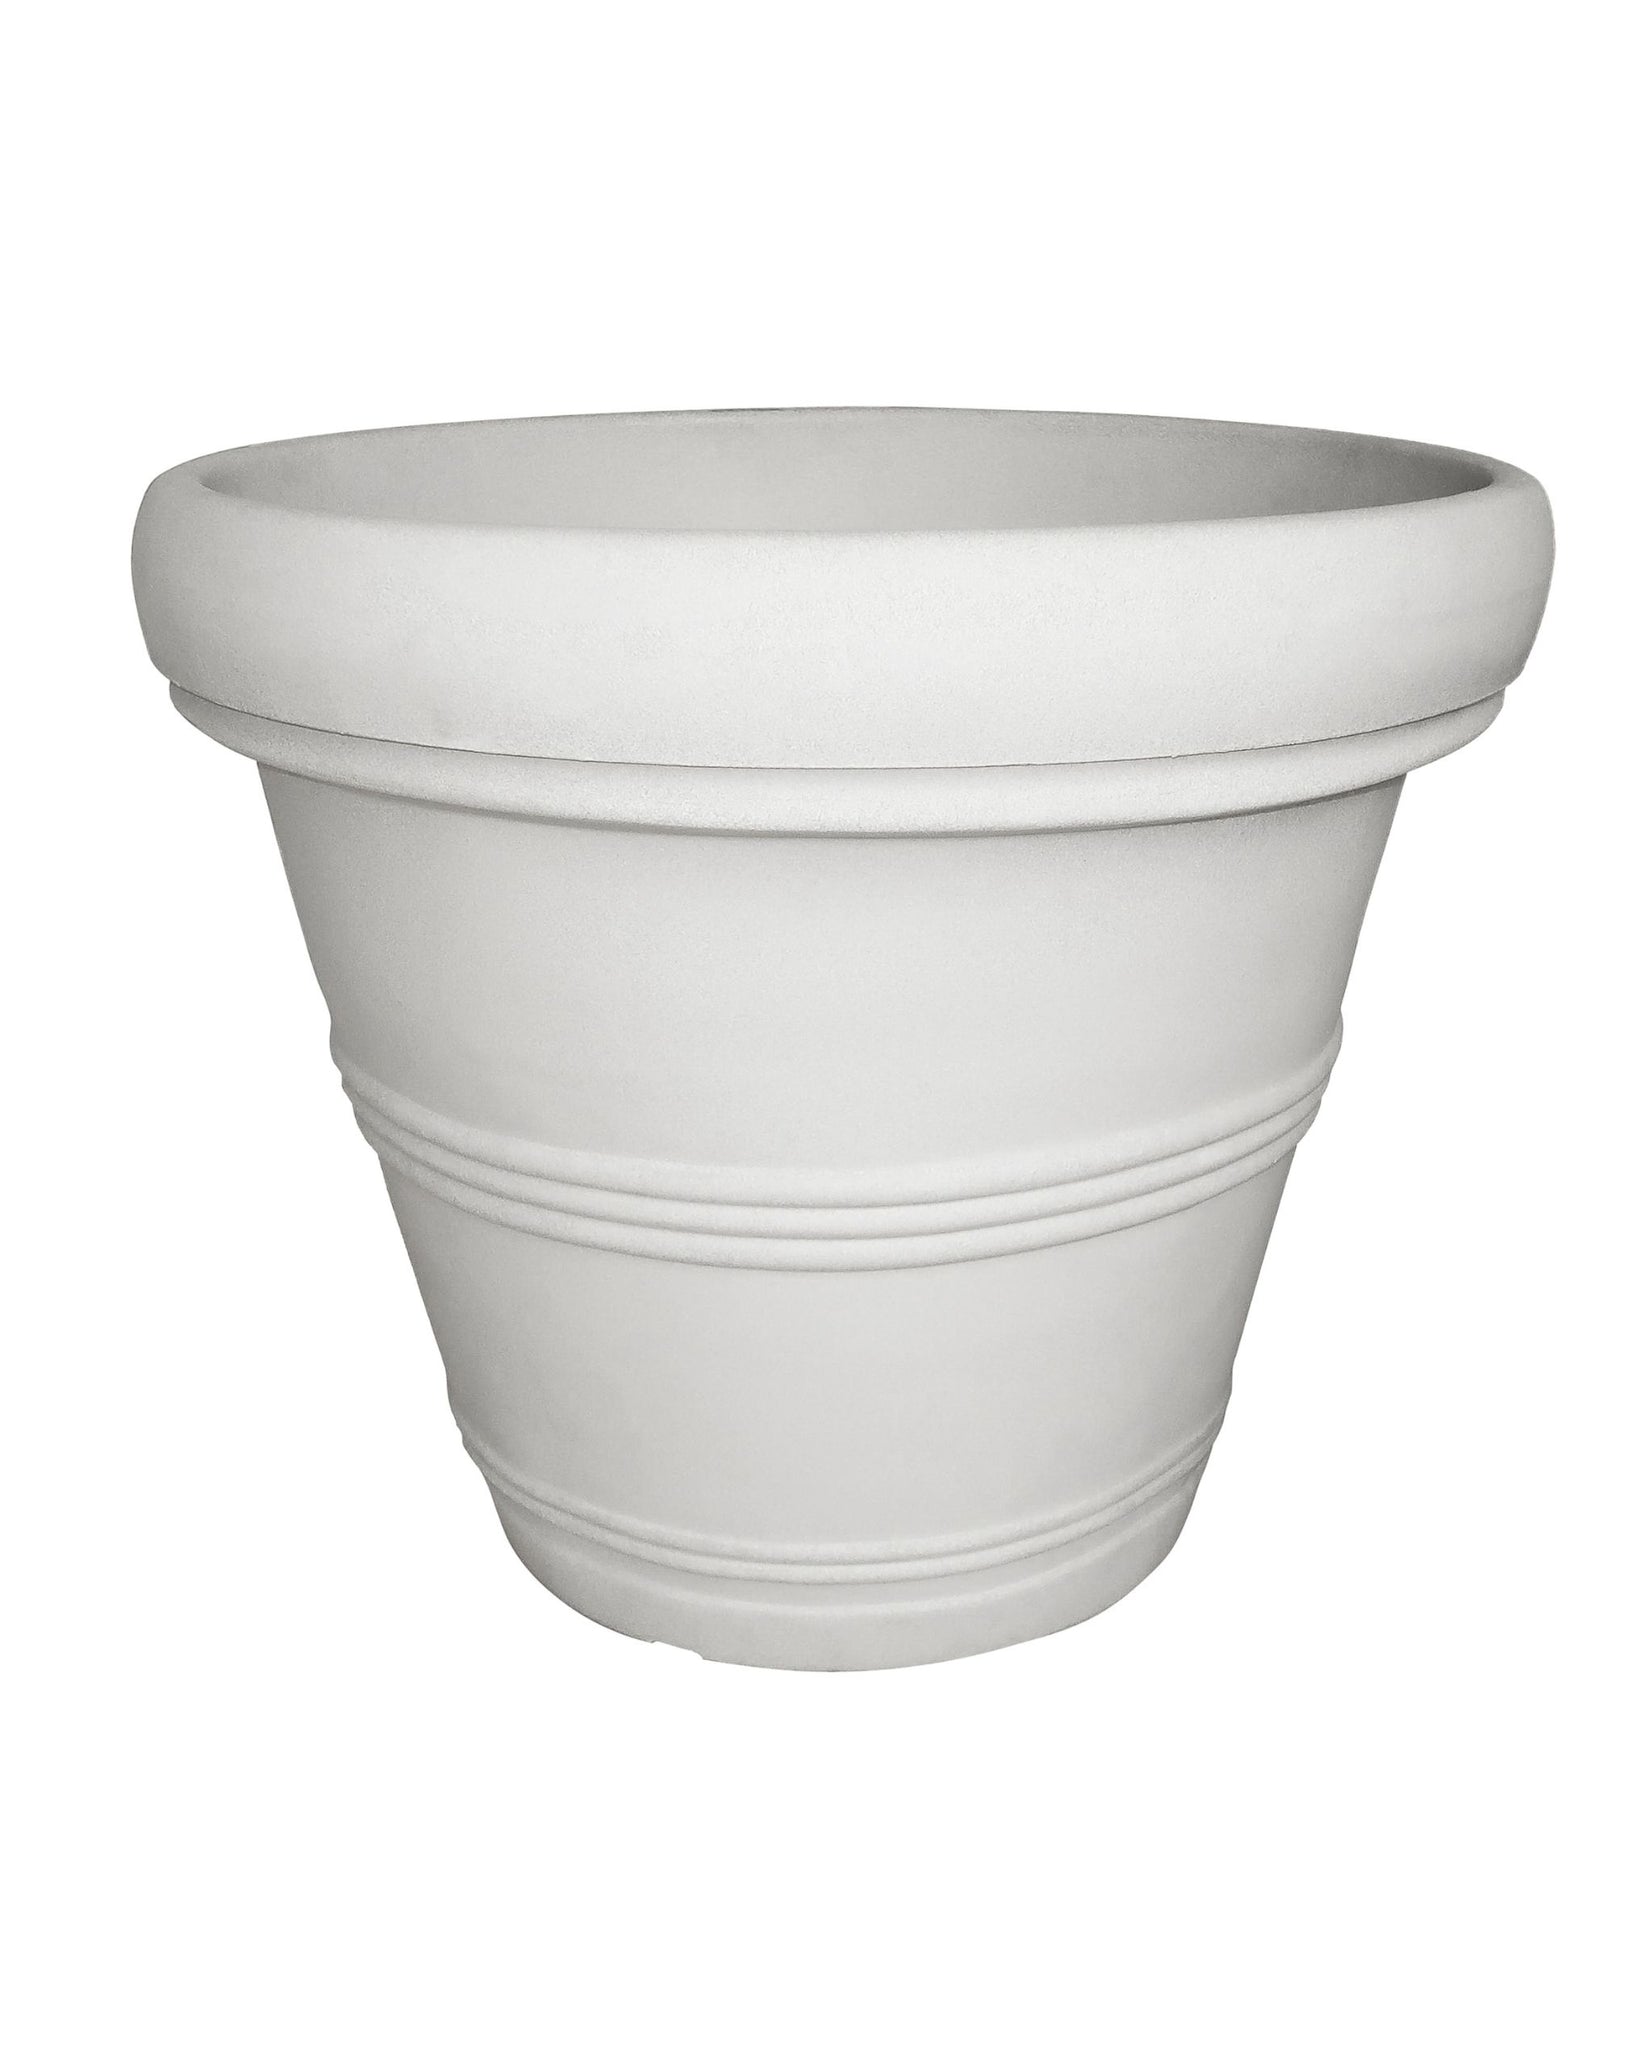 Side view of this beautiful timeless Round Basic Rim Planter in the colour Sandstone